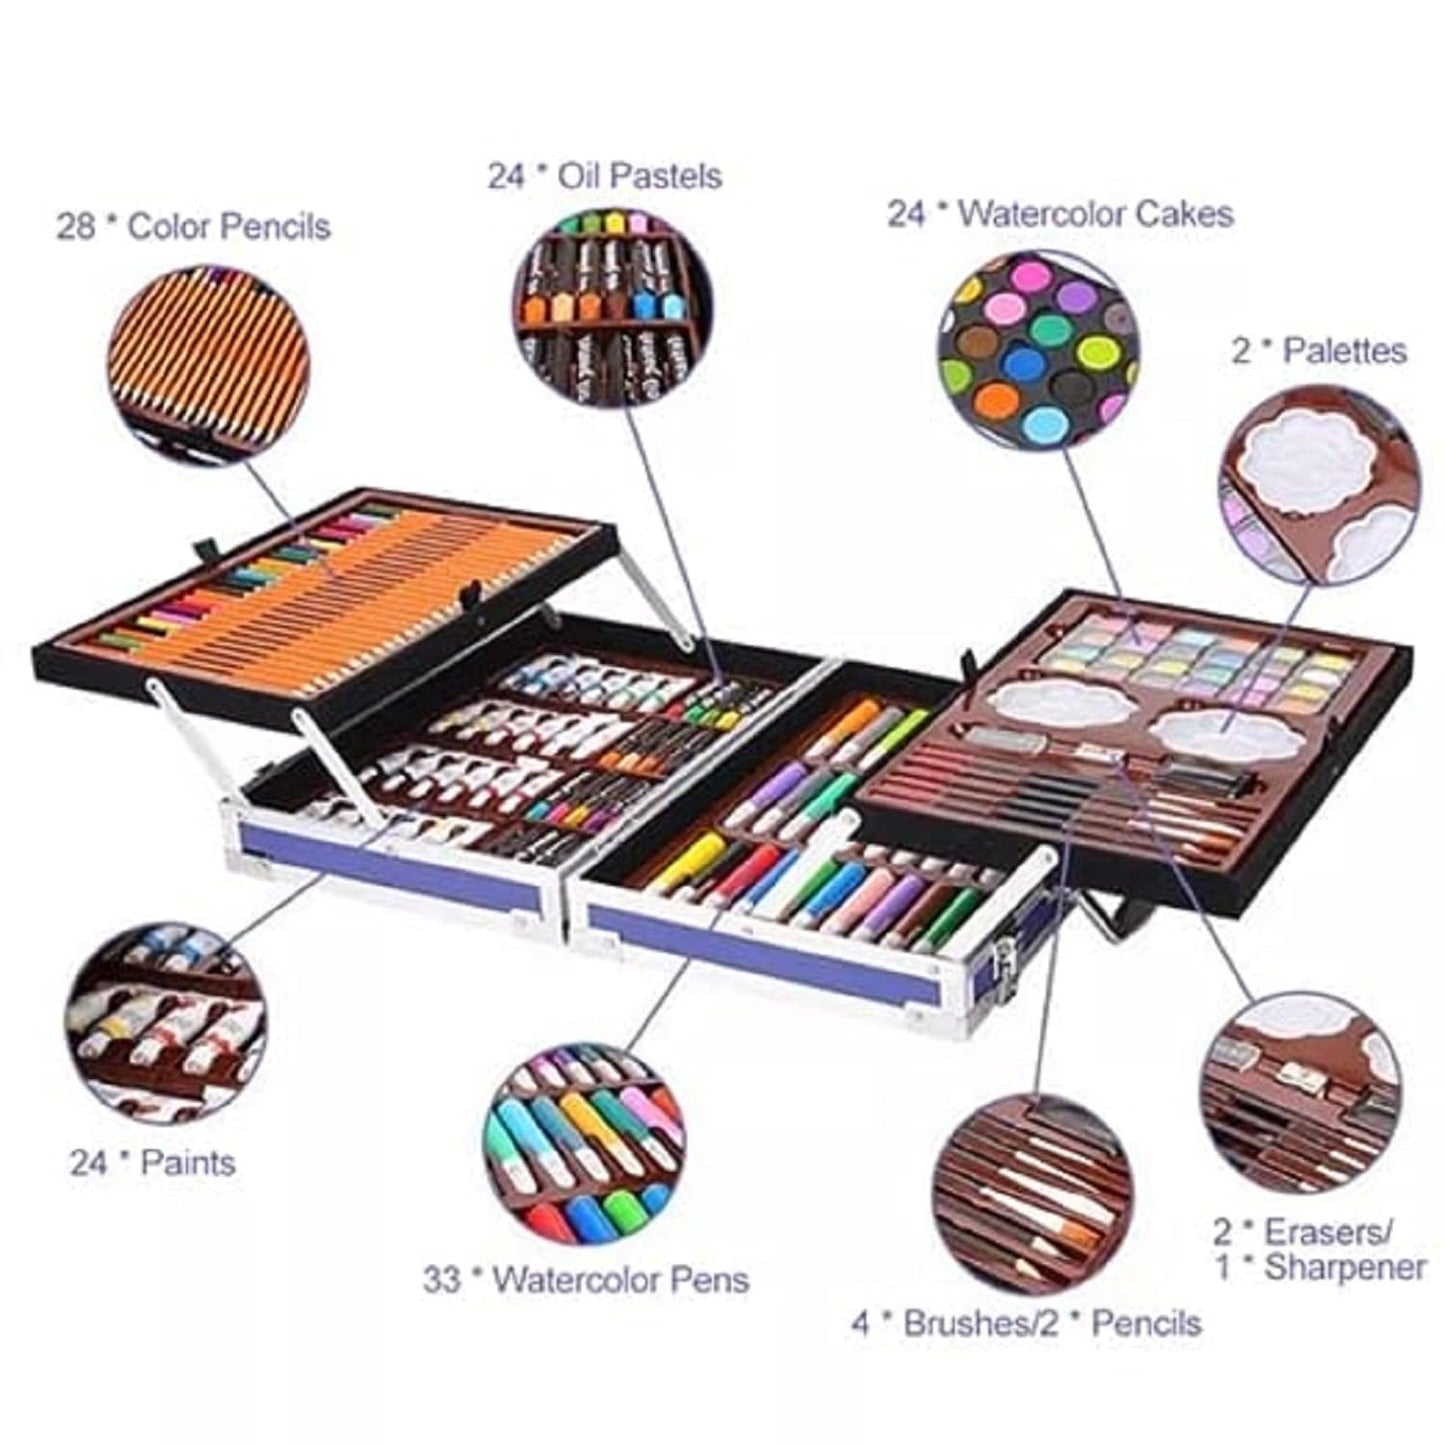 All in one Art and Craft Set Professional Drawing Color Pencils, Oil Pastel, Sketches, Water Colors and Acrylic Paint (DINOSAUR)